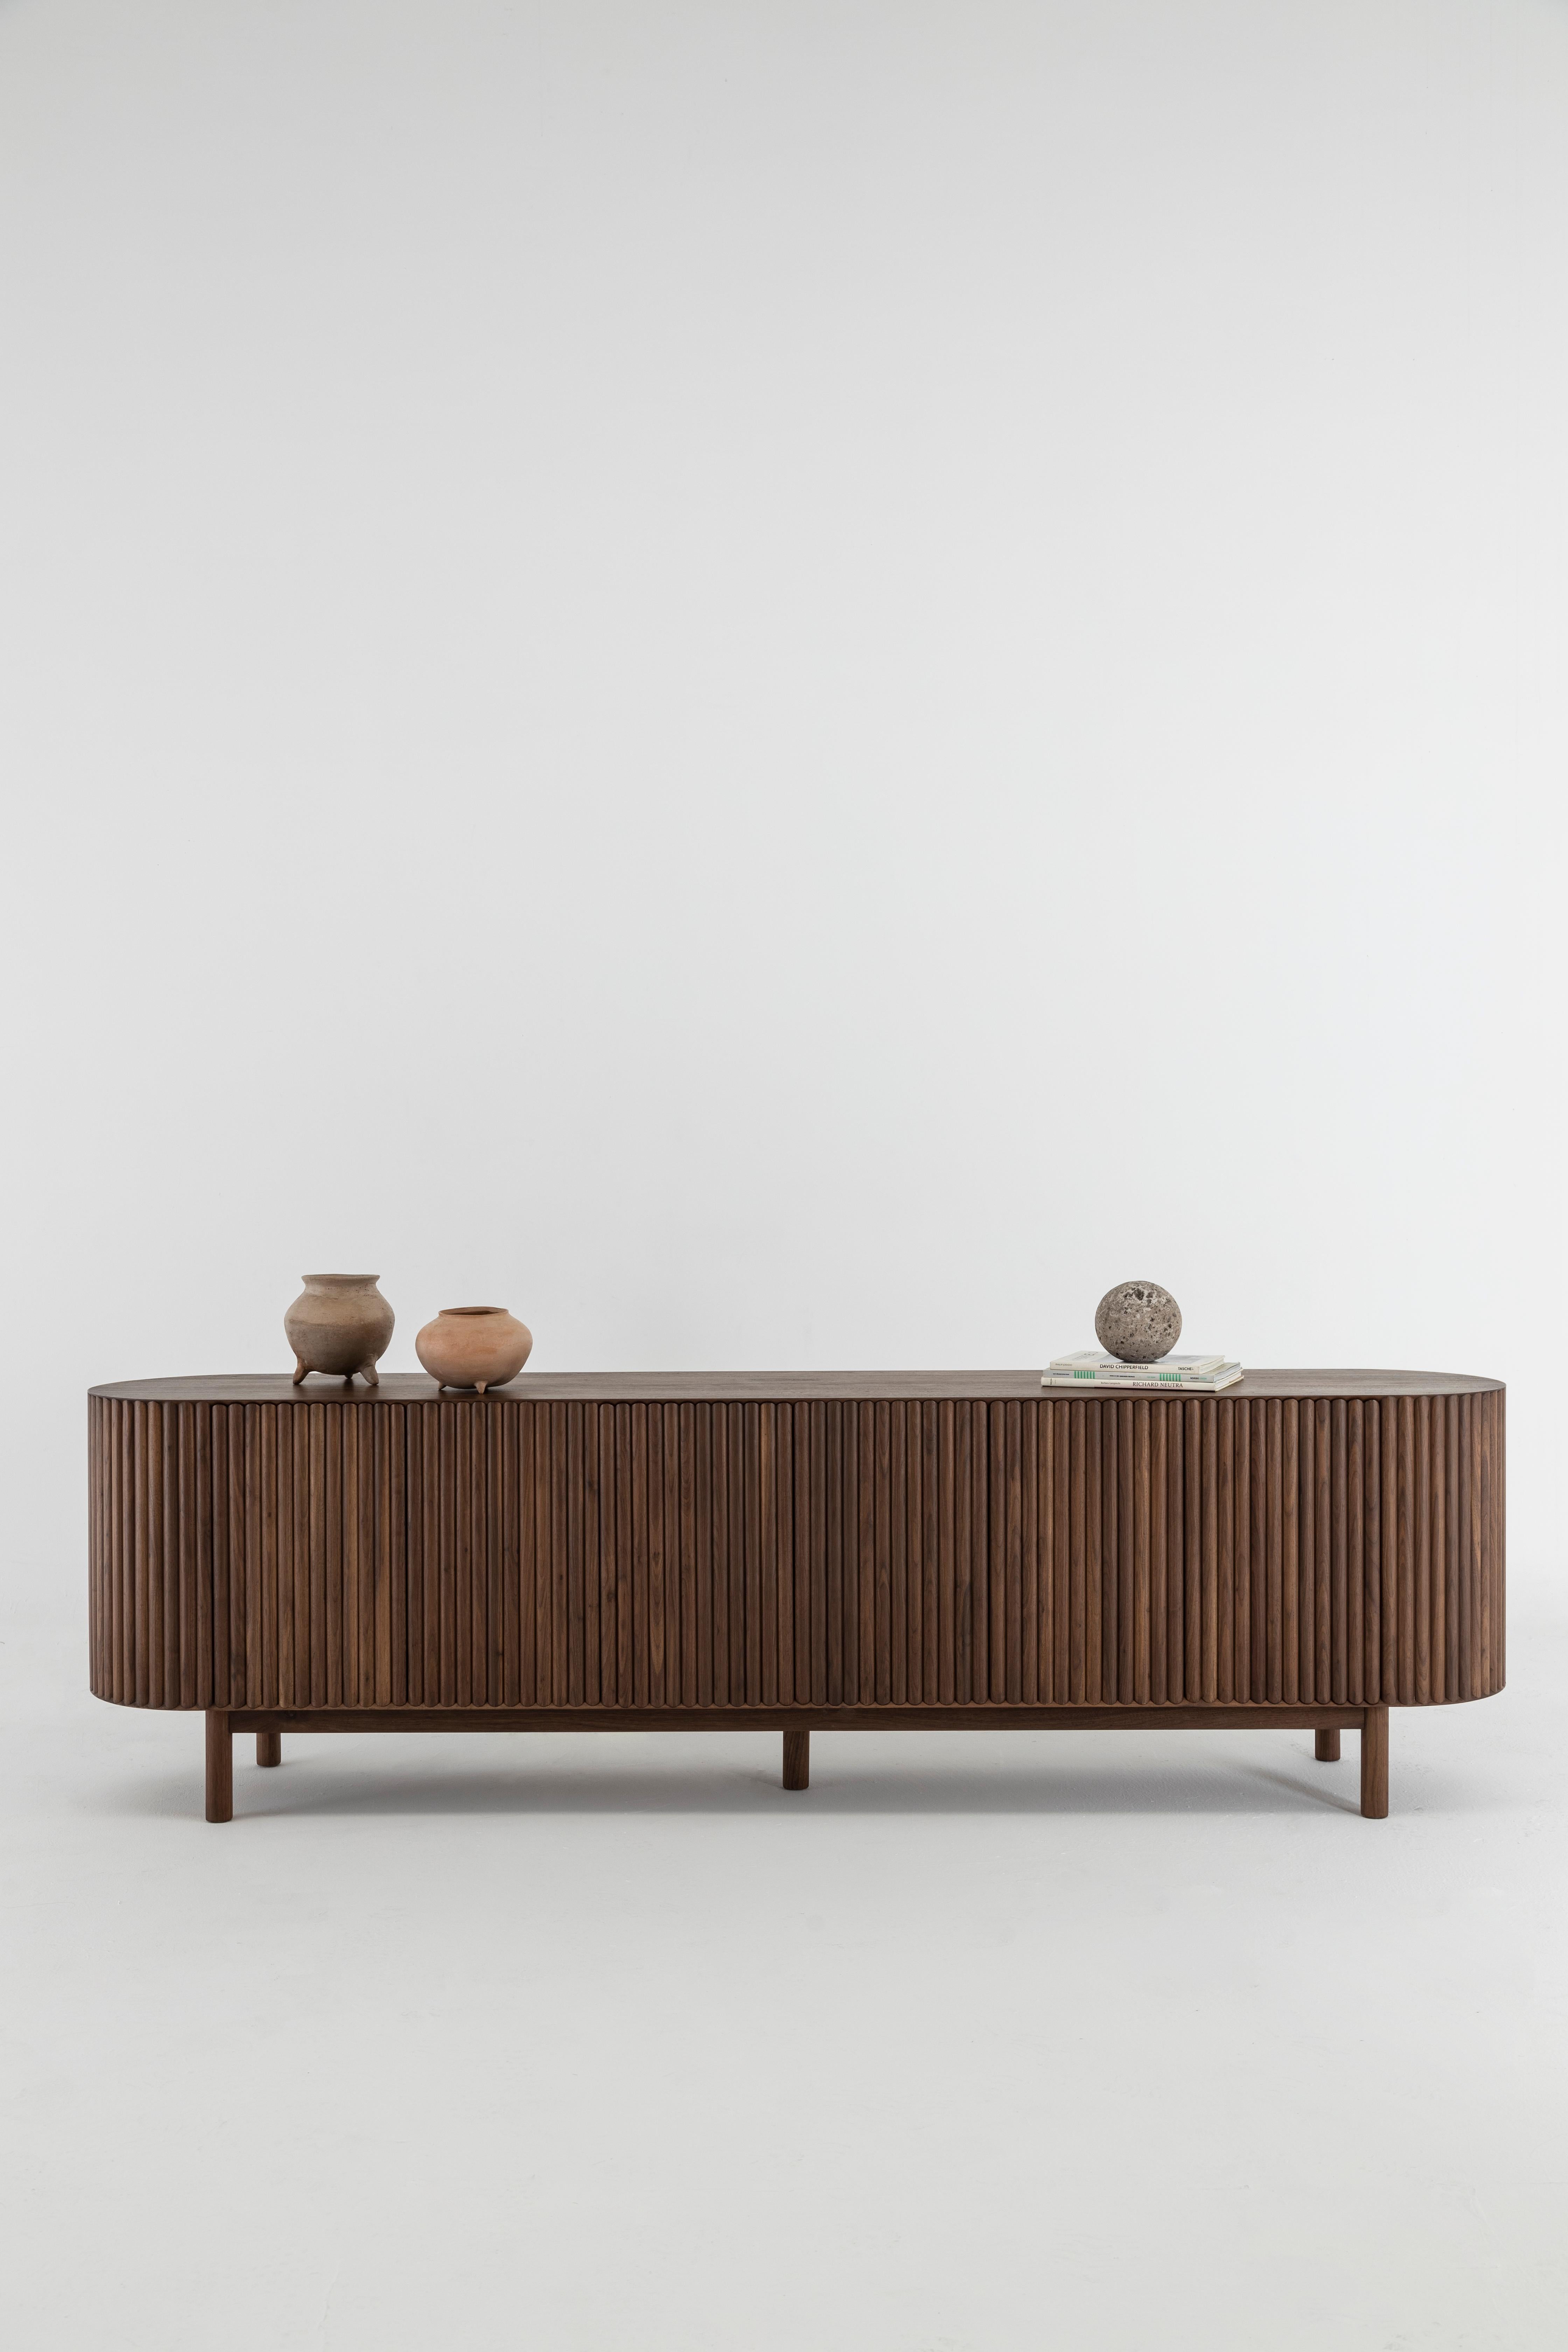 Mexican RIMA Credenza, 2.5m Solid Walnut Wood For Sale